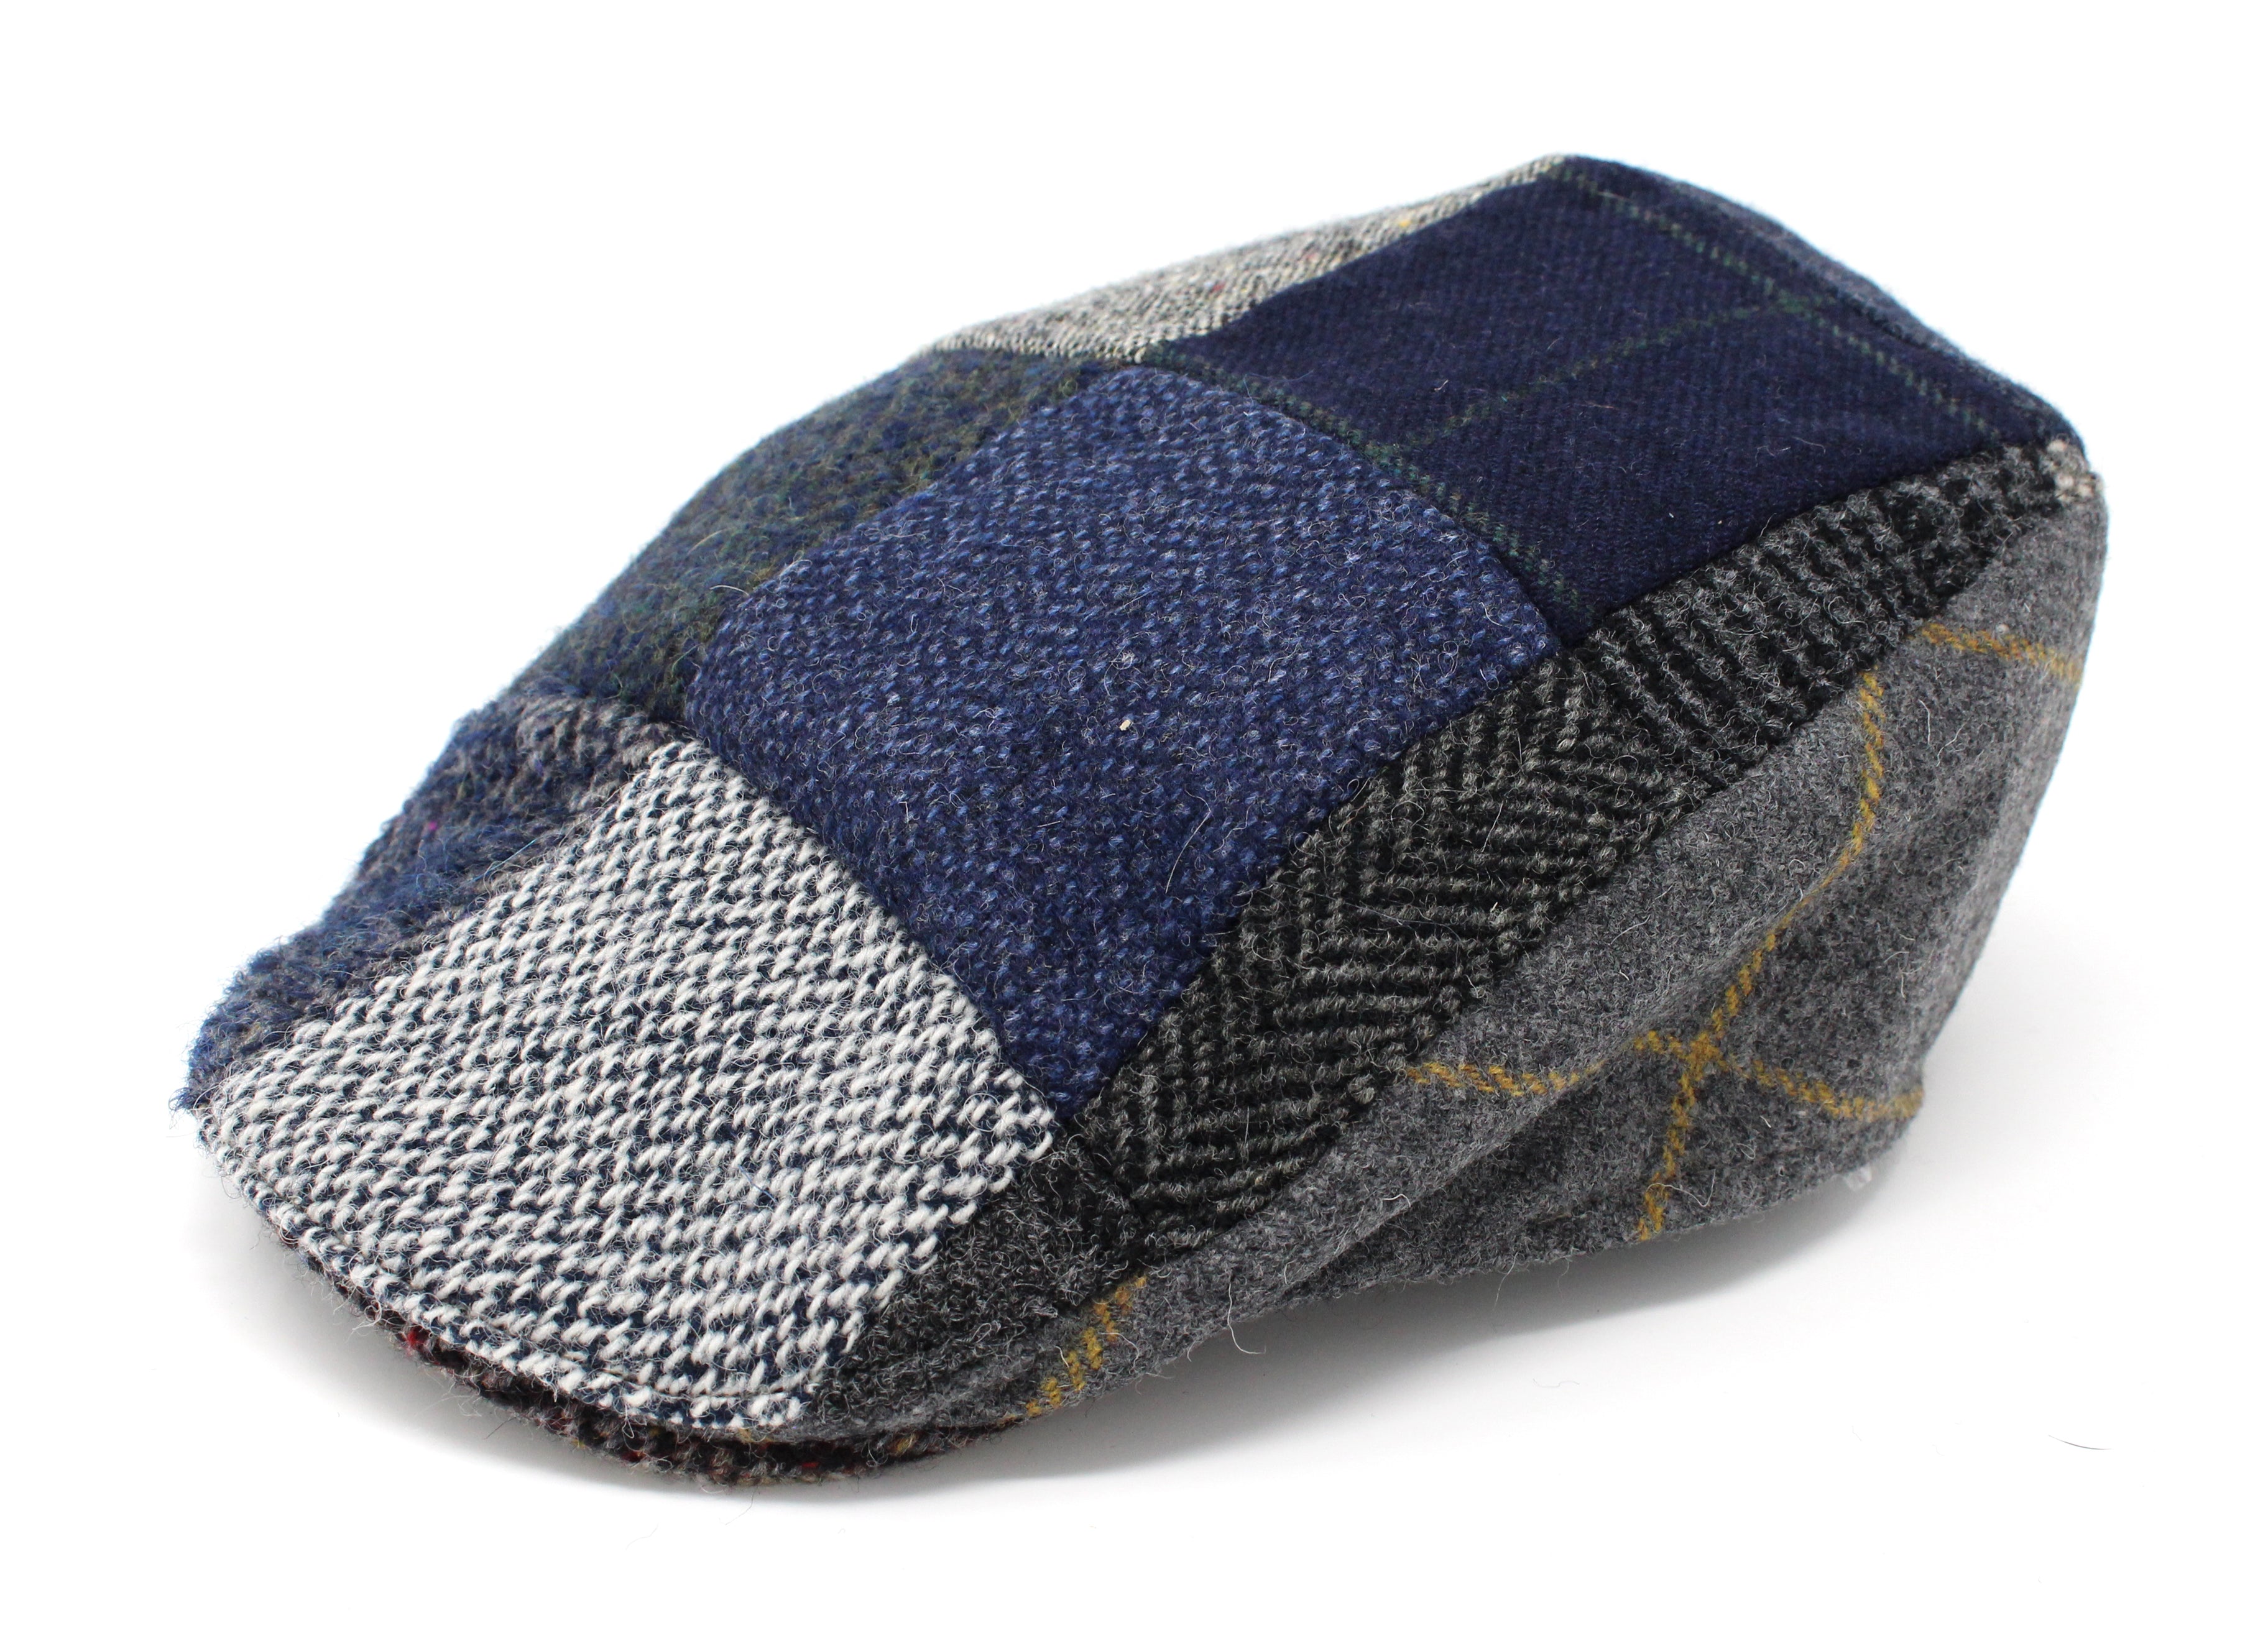 Hanna Hats Donegal Touring Cap Patchwork Grey Blue Tweed